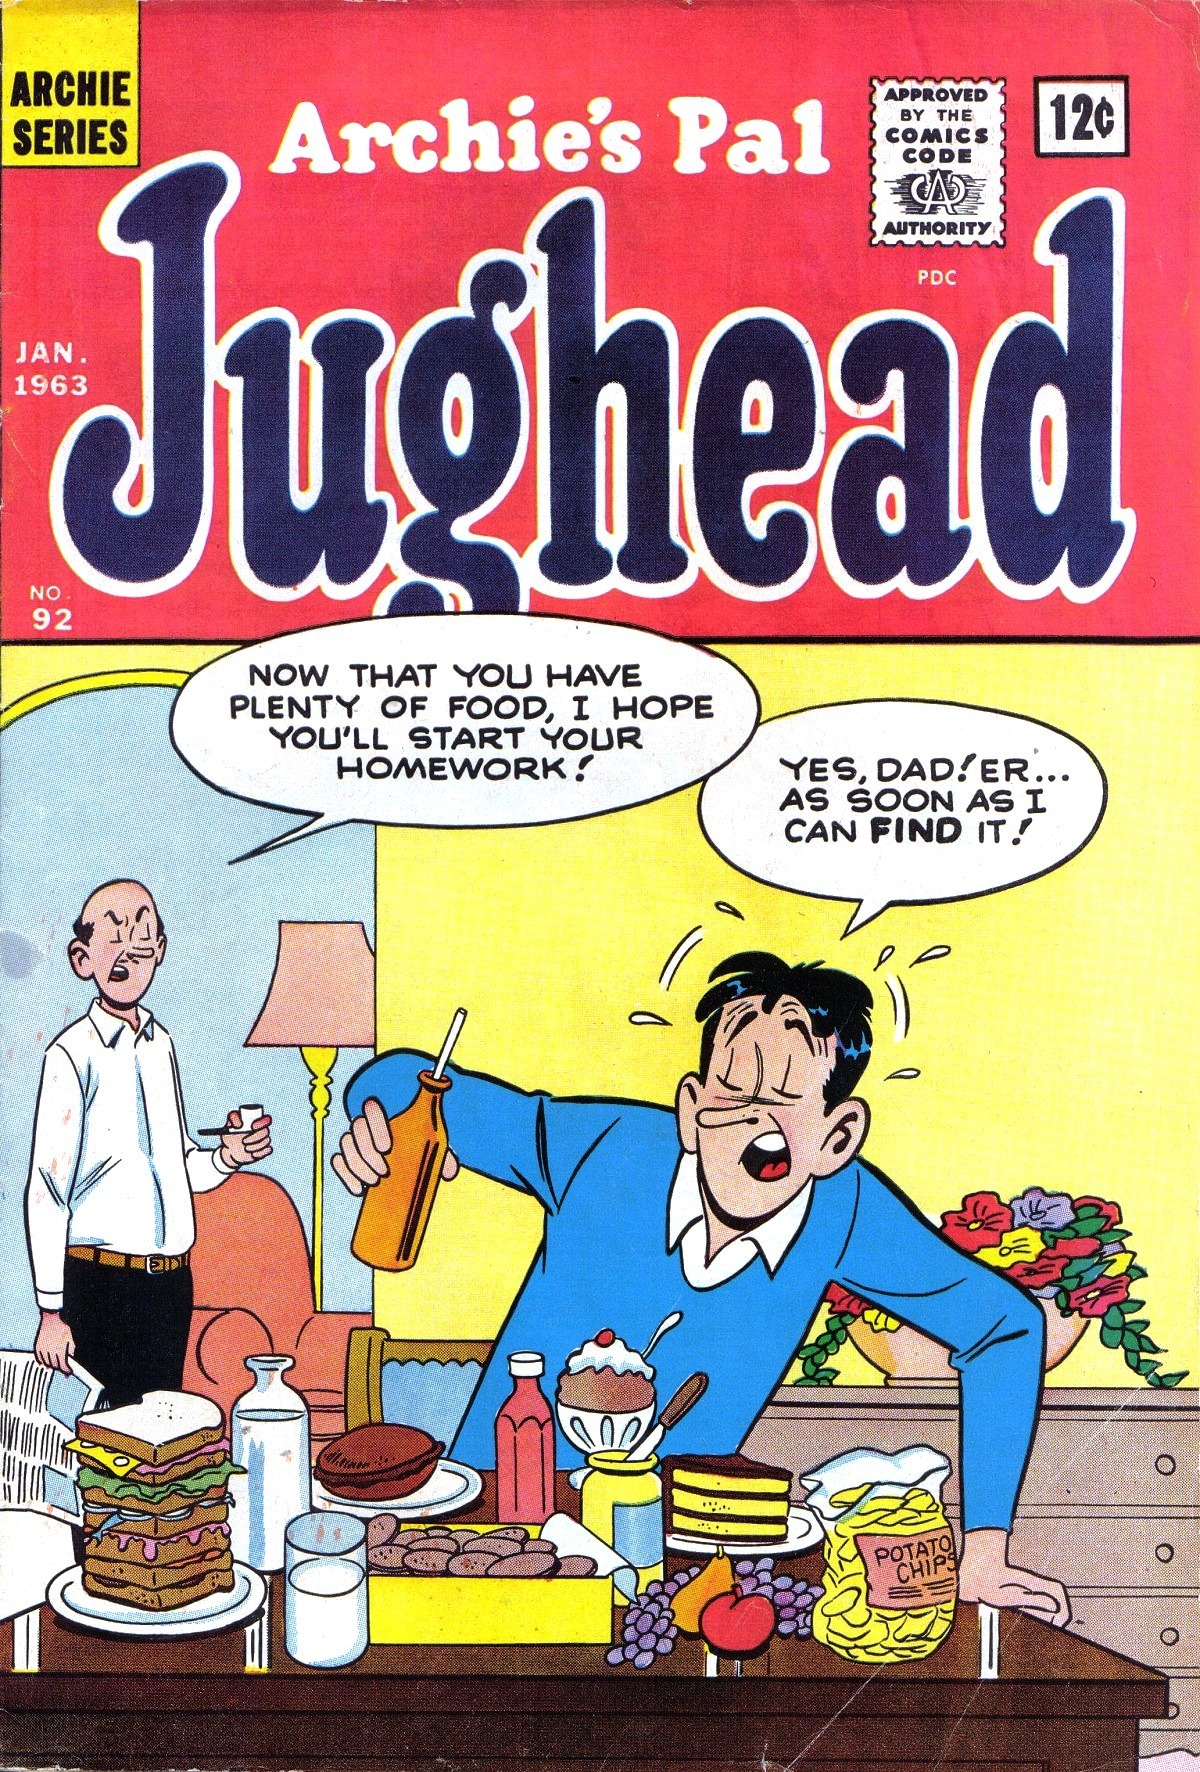 Read online Archie's Pal Jughead comic -  Issue #92 - 1